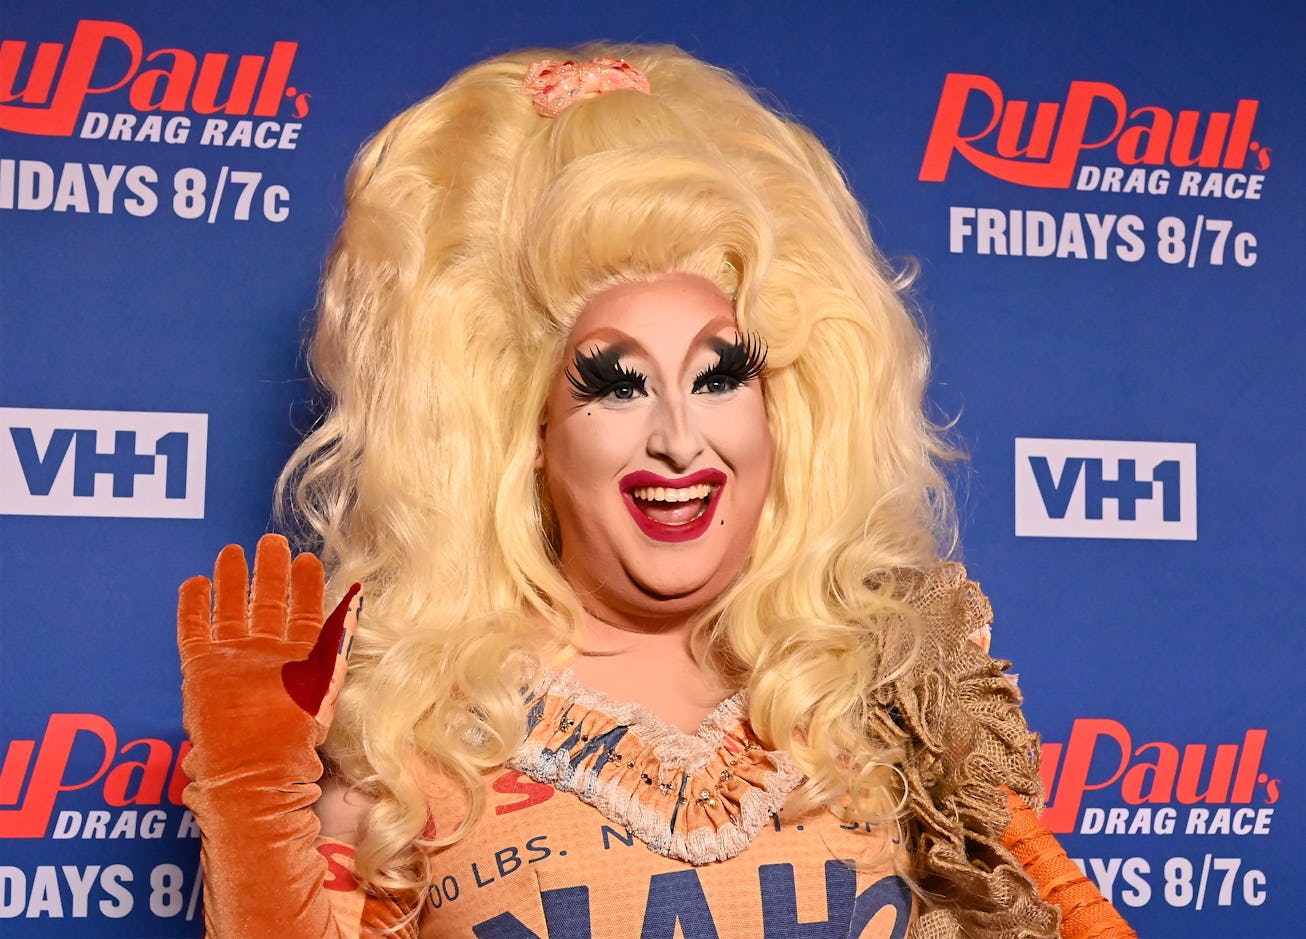 Sherry Pie, a contestant on RuPaul's Drag Race Season 12, was accused of sexual coercion and abuse b...